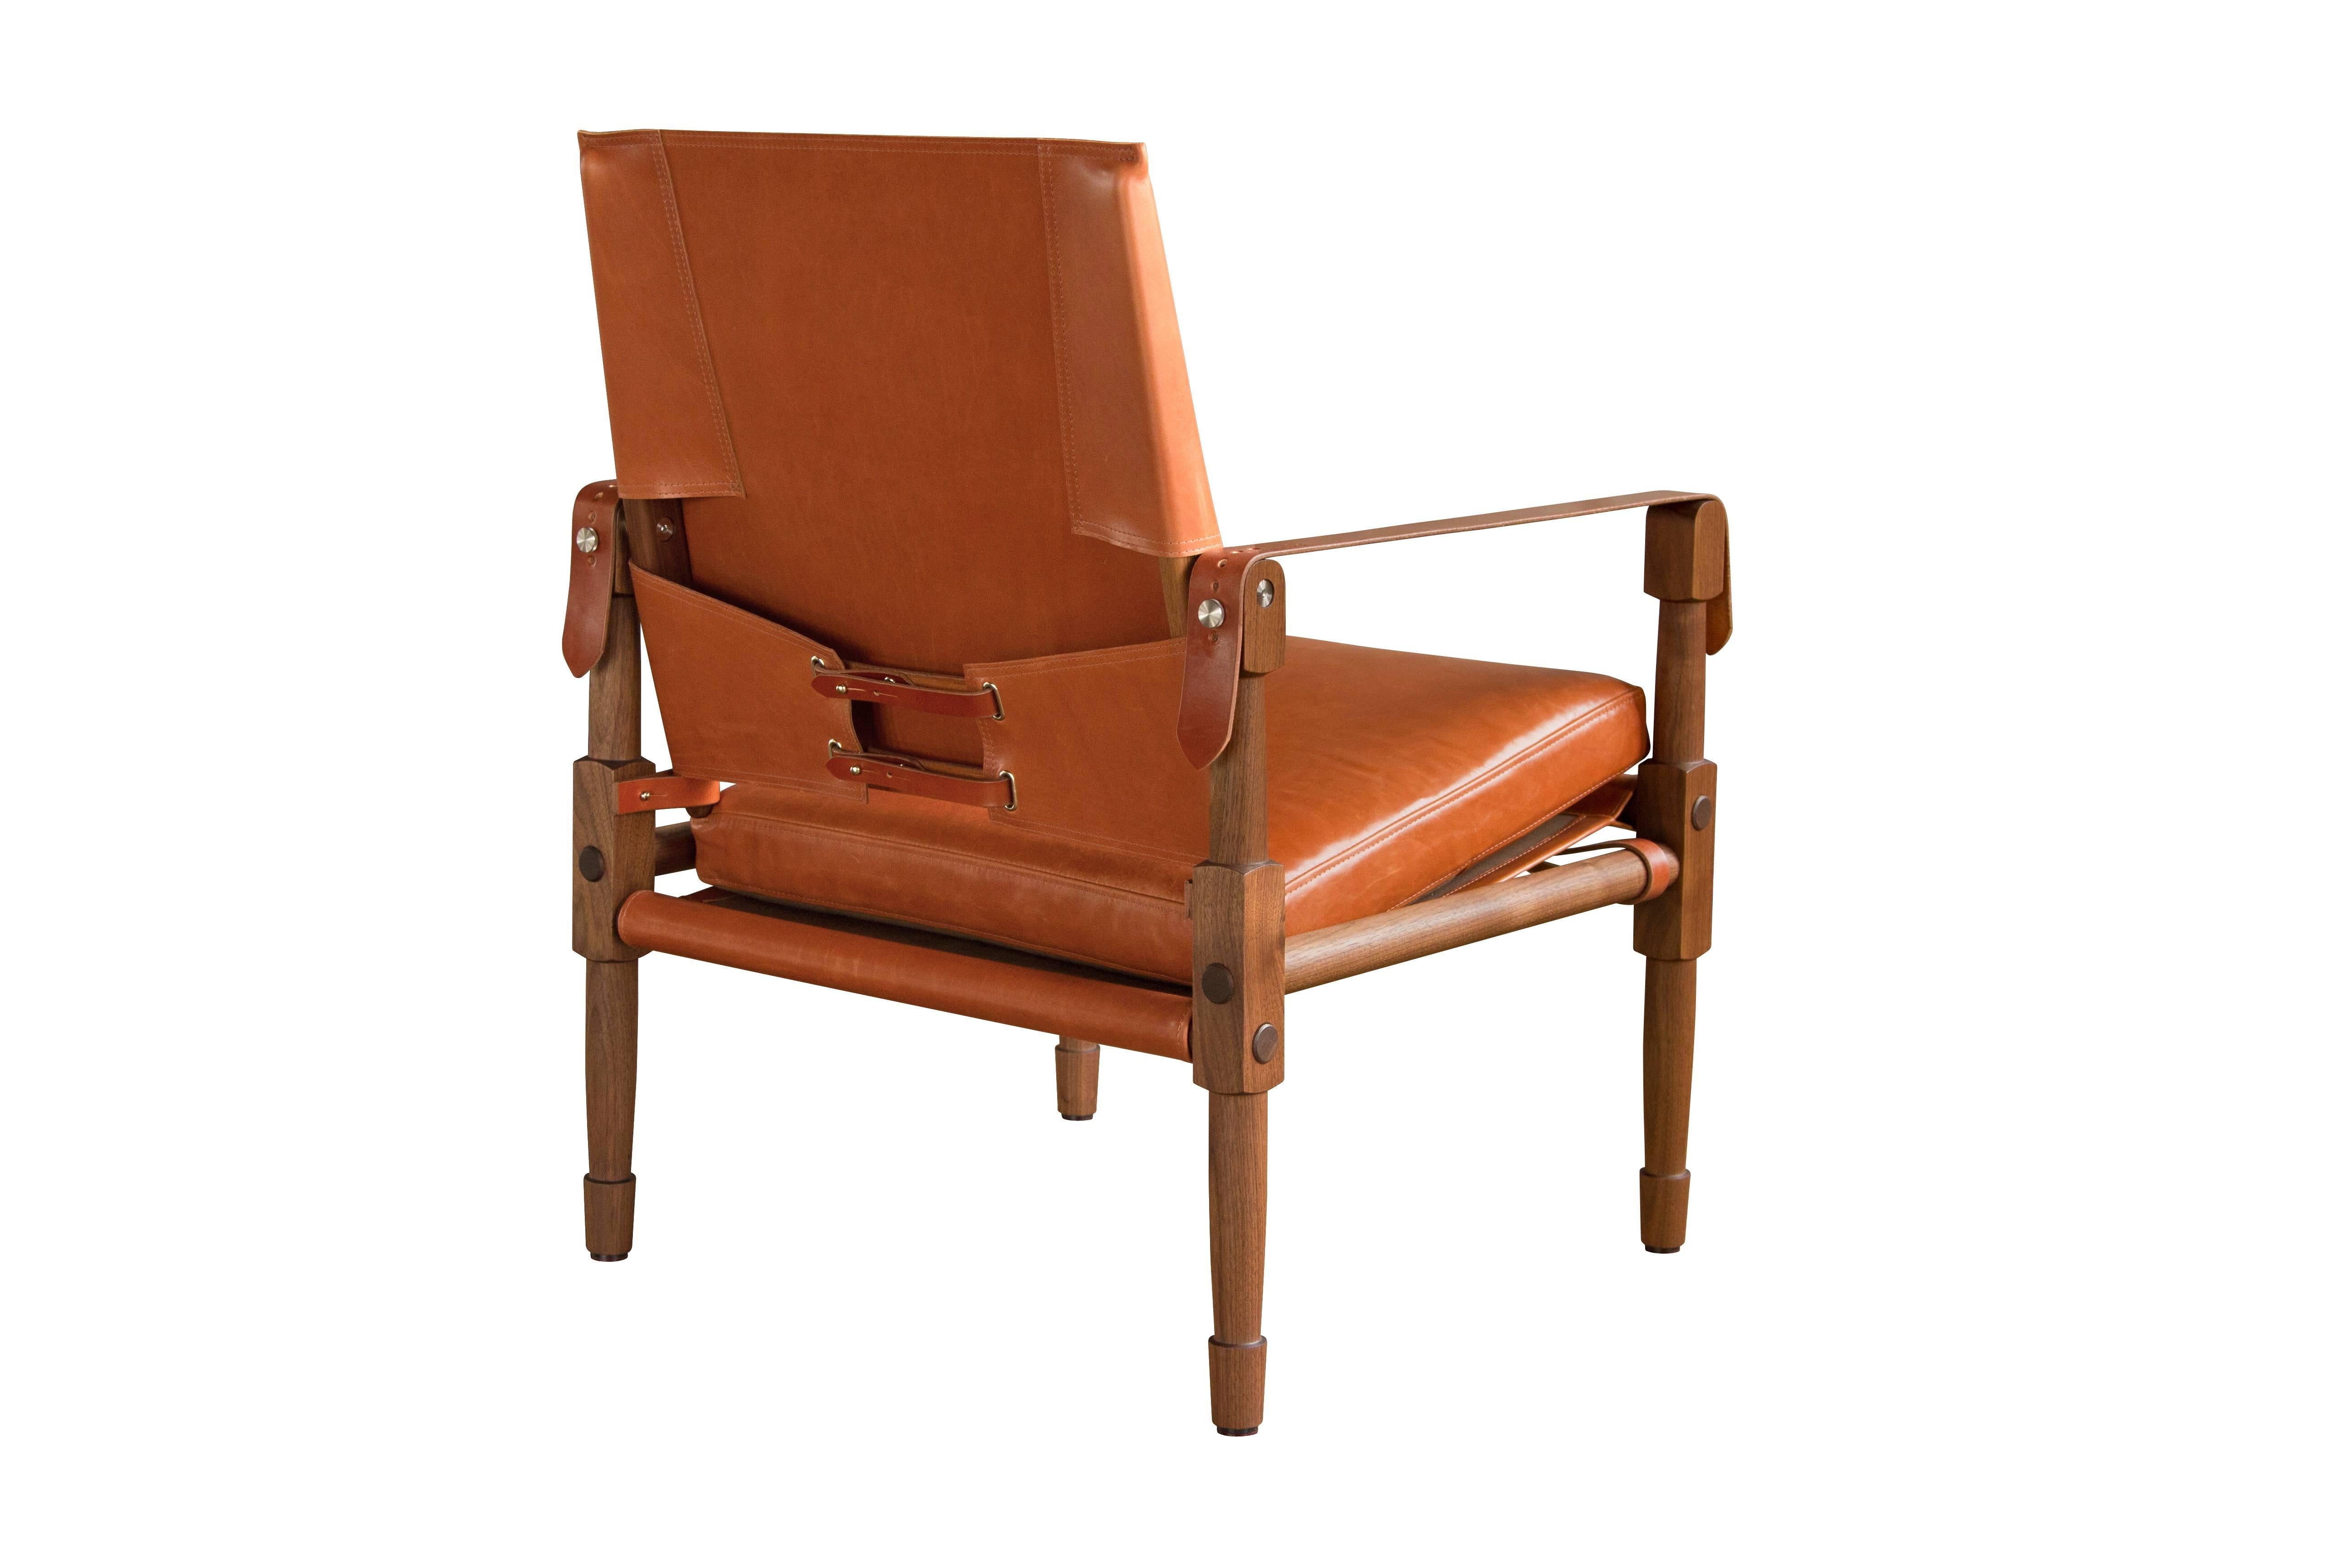 The Grand Chatwin Lounge Chair in oiled walnut with Moore and Giles: Diablo / Acorn leather upholstery and cognac English bridle leather.

The modern campaign collection by Richard Wrightman combines the vernacular of traditional form with a modern